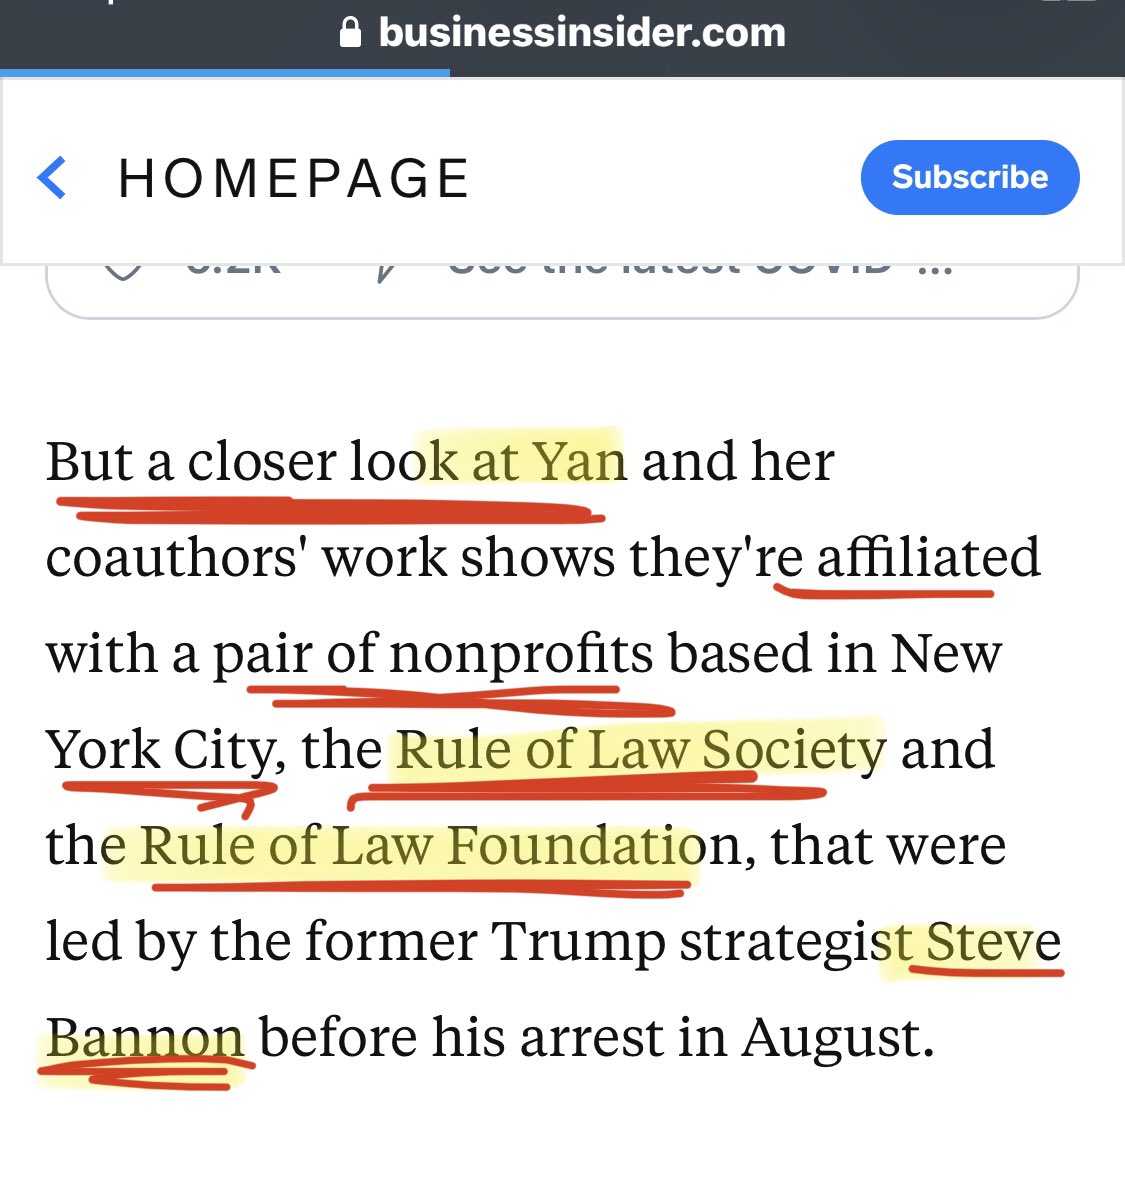 Yan is affiliated with two of Bannon’s non-profits. Recall, Bannon was just indicted for using a non-profit for illegal activities. The pair of nonprofits here, are based in NYC: Rule of Law Society and Rule of Law Foundation.